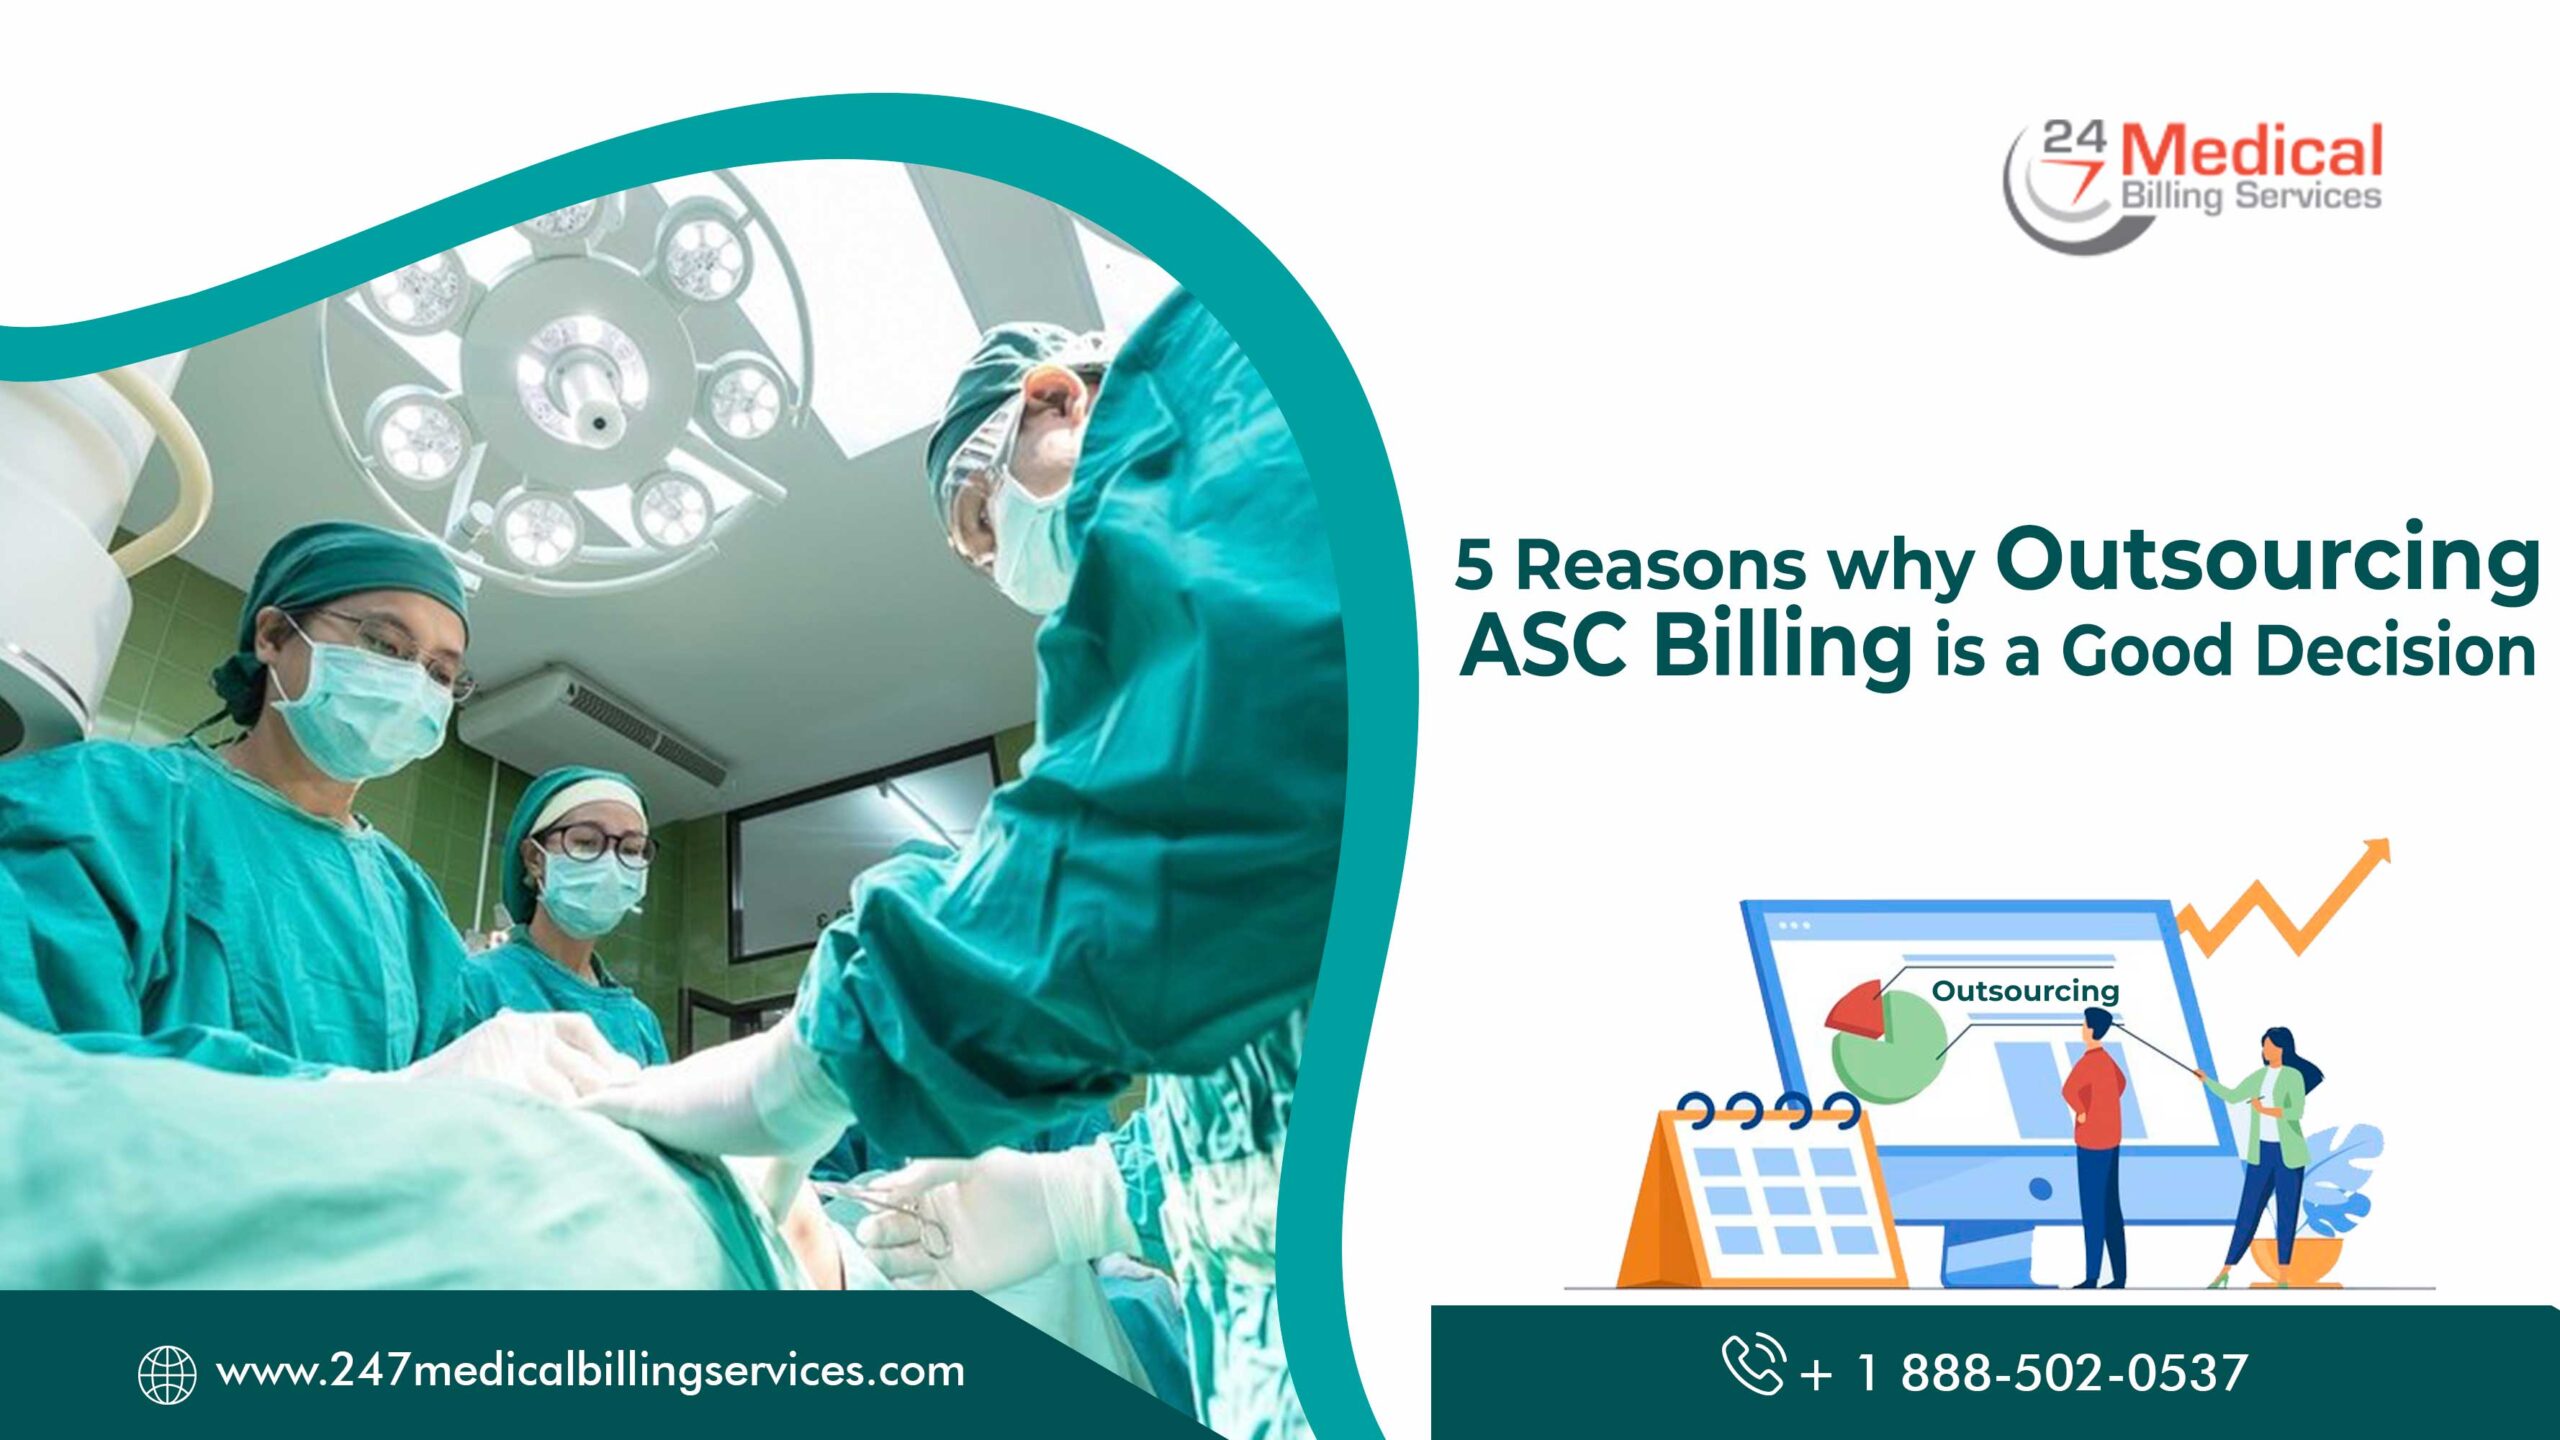  5 Reasons why Outsourcing ASC Billing is a Good Decision